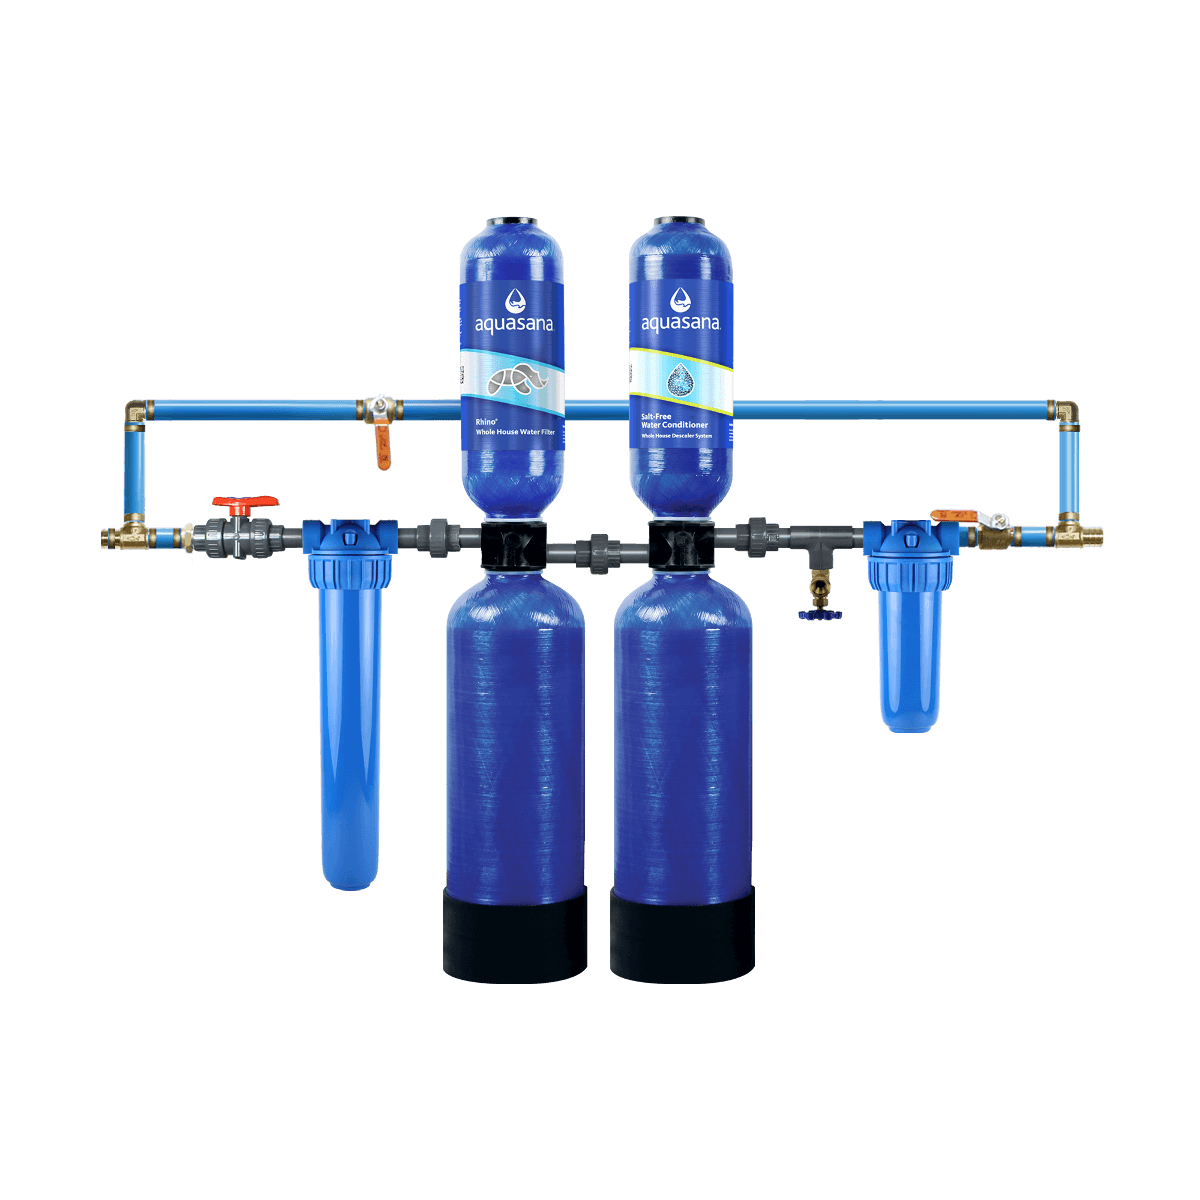 Rhino Whole House Water Filter System With Salt-Free Water Conditioner Home Water Filtration 10/1,000,000 Aquasana photo